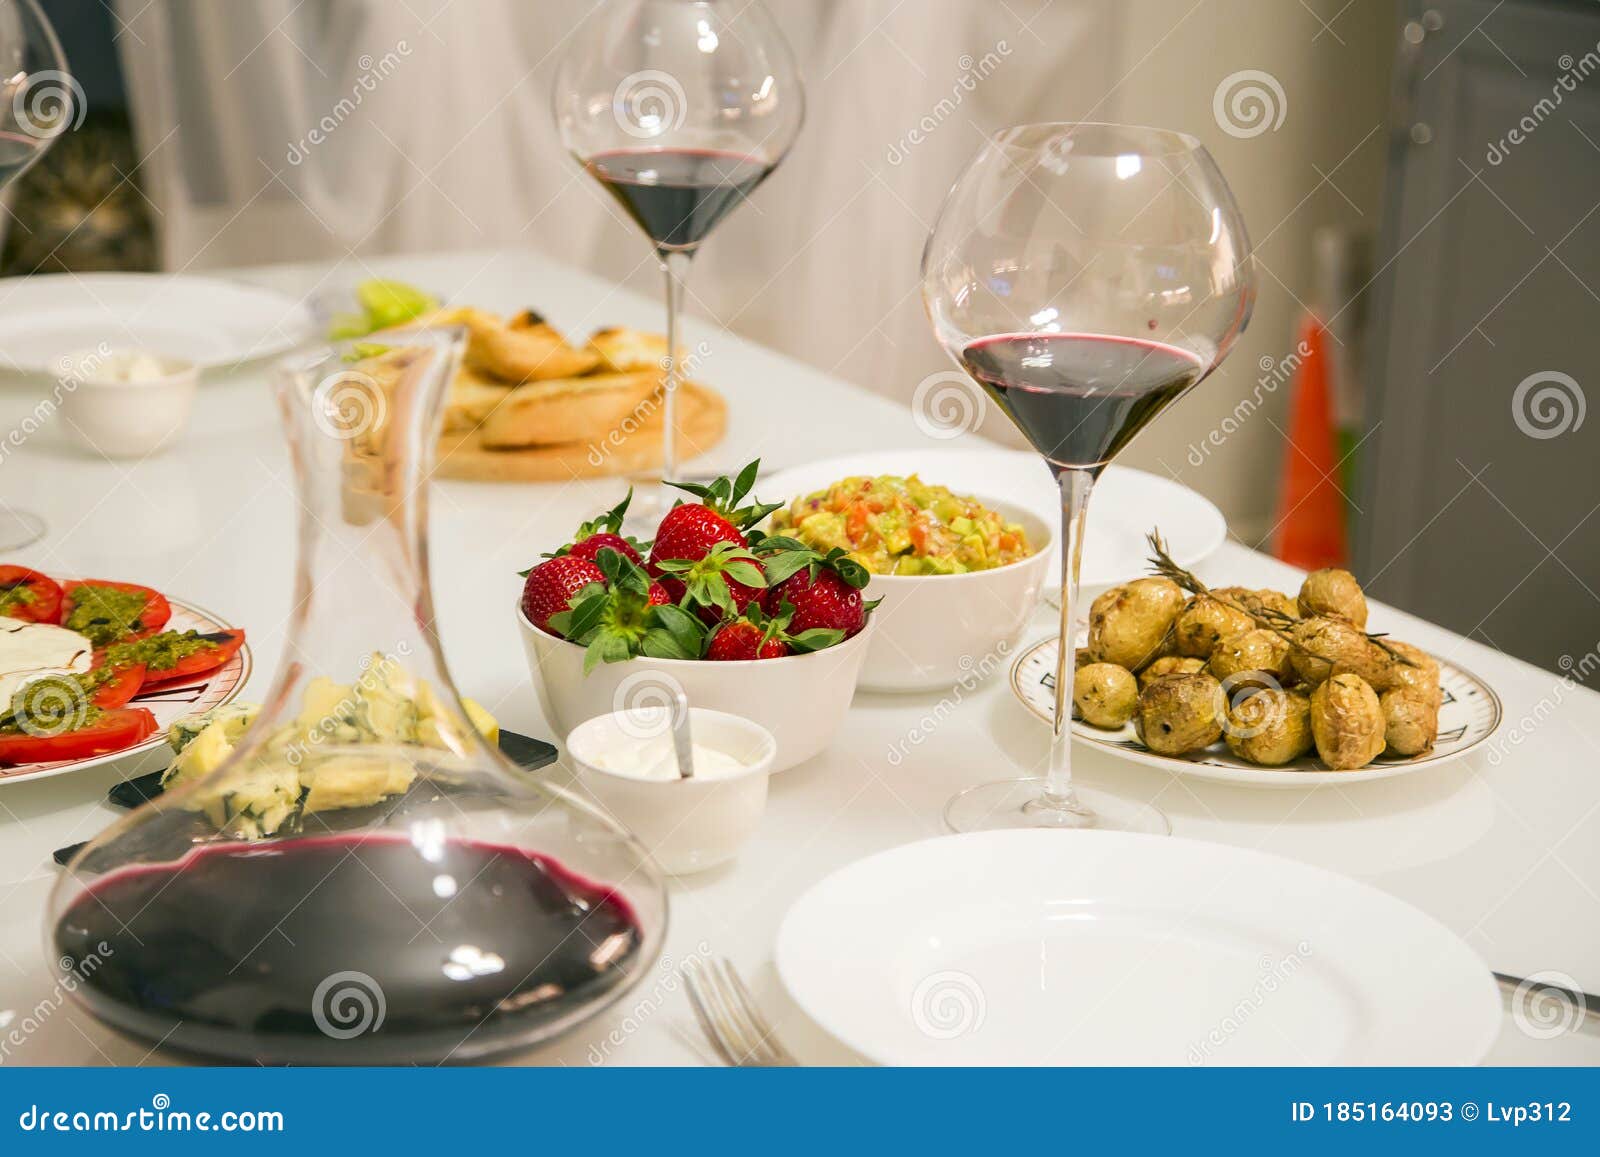 Table Setting With Red Wine And Strawberries Stock Image Image Of Movement Restaurant